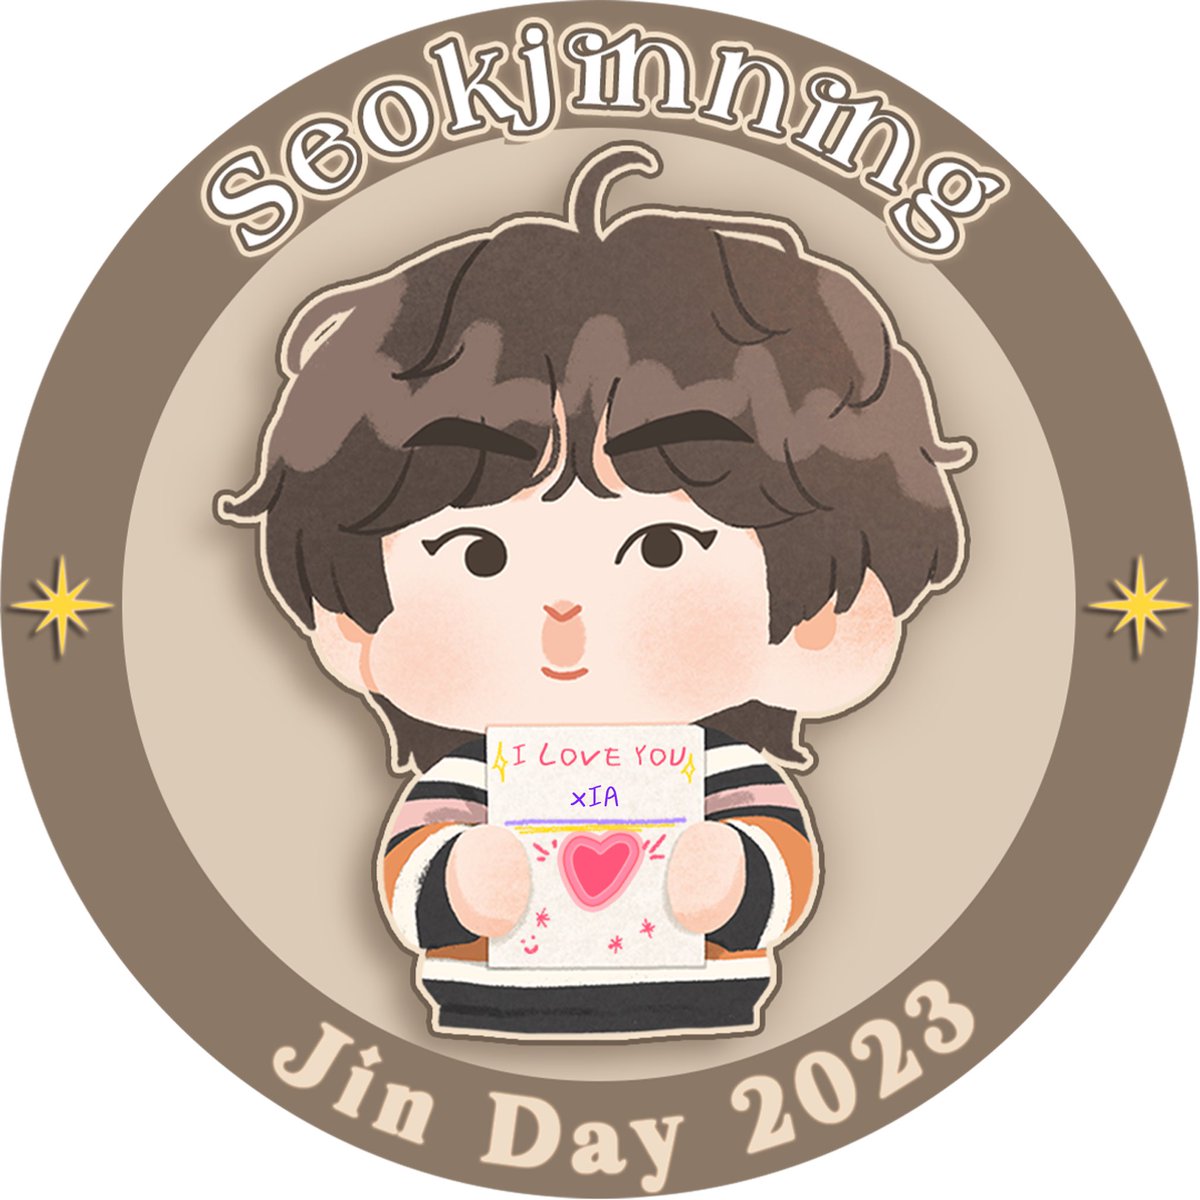 ｡ﾟﾟ･｡･ﾟﾟ｡ ﾟ。Seokjin•.⋆︎*♡🌕🛸 ﾟ･｡･ ゜ I have made my submission for #OurSeokjinningTimePt2 💜🌹☁️ How about you? Thankyou for the cute emblem @jinjoo_bts @bemyjinnie @abyssyoonjin 🫡🫡🫡🫶🏻🫶🏻🫶🏻💜🙏